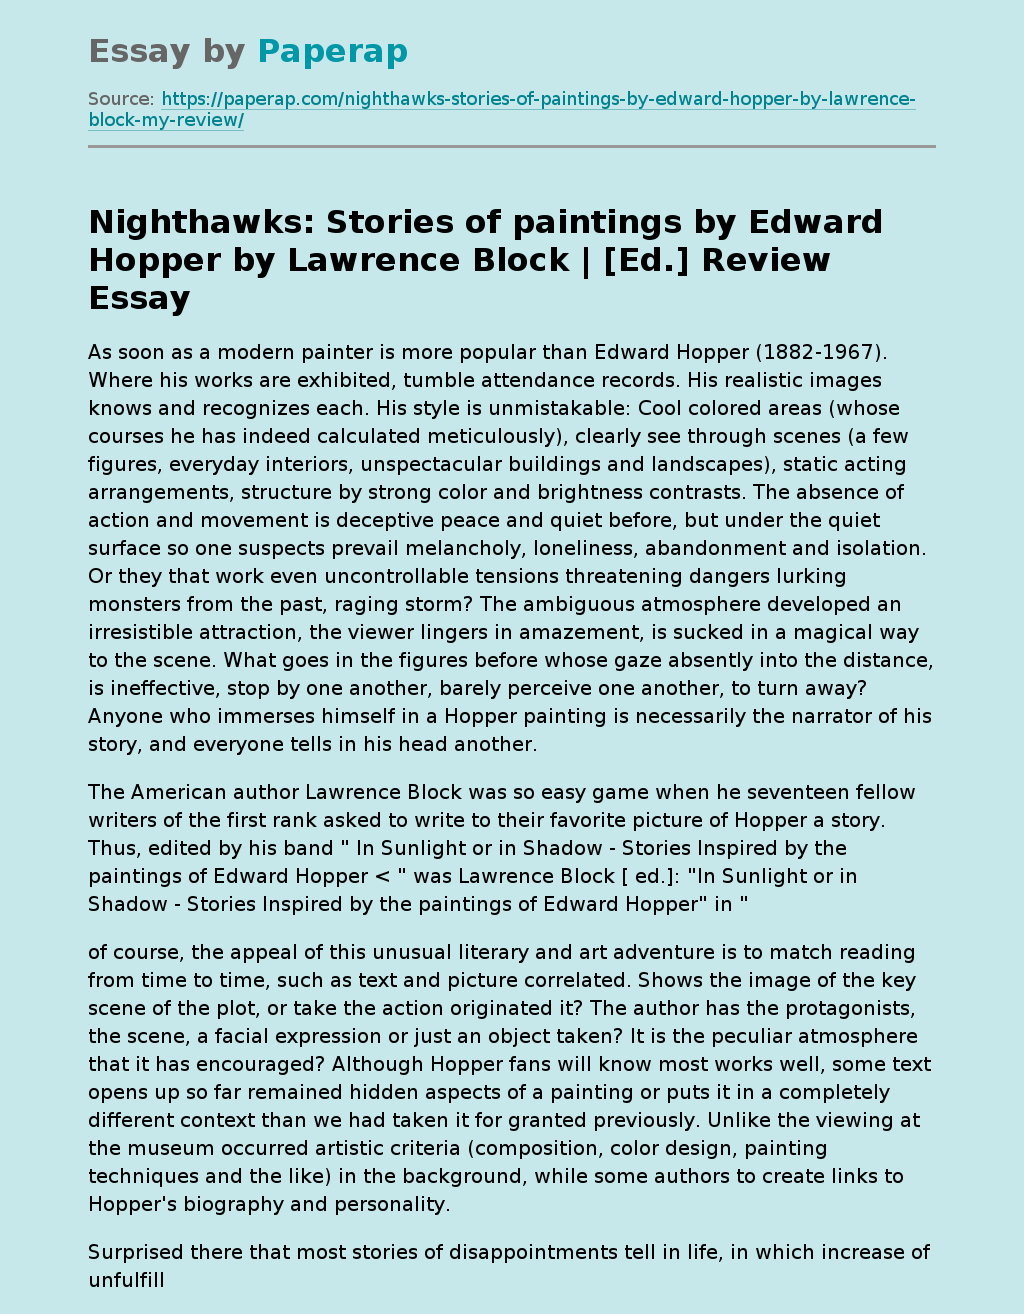 Nighthawks: Stories of paintings by Edward Hopper by Lawrence Block My Review